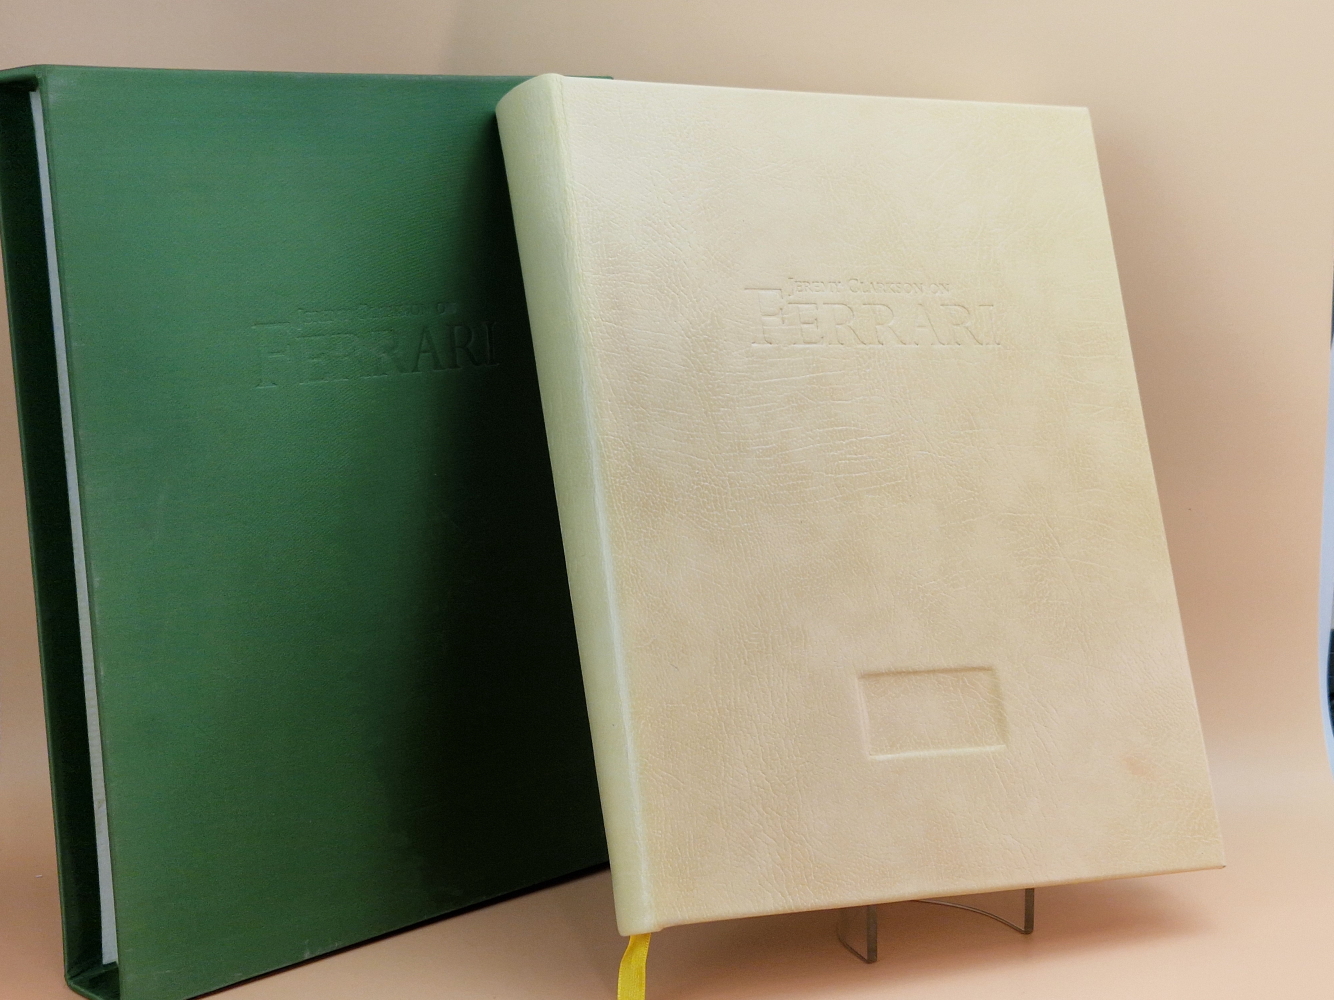 JEREMY CLARKSON ON FERRARI. LIMITED EDITION. IN UNUSUAL COPY OF THIS RARE BOOK WITH LEATHER